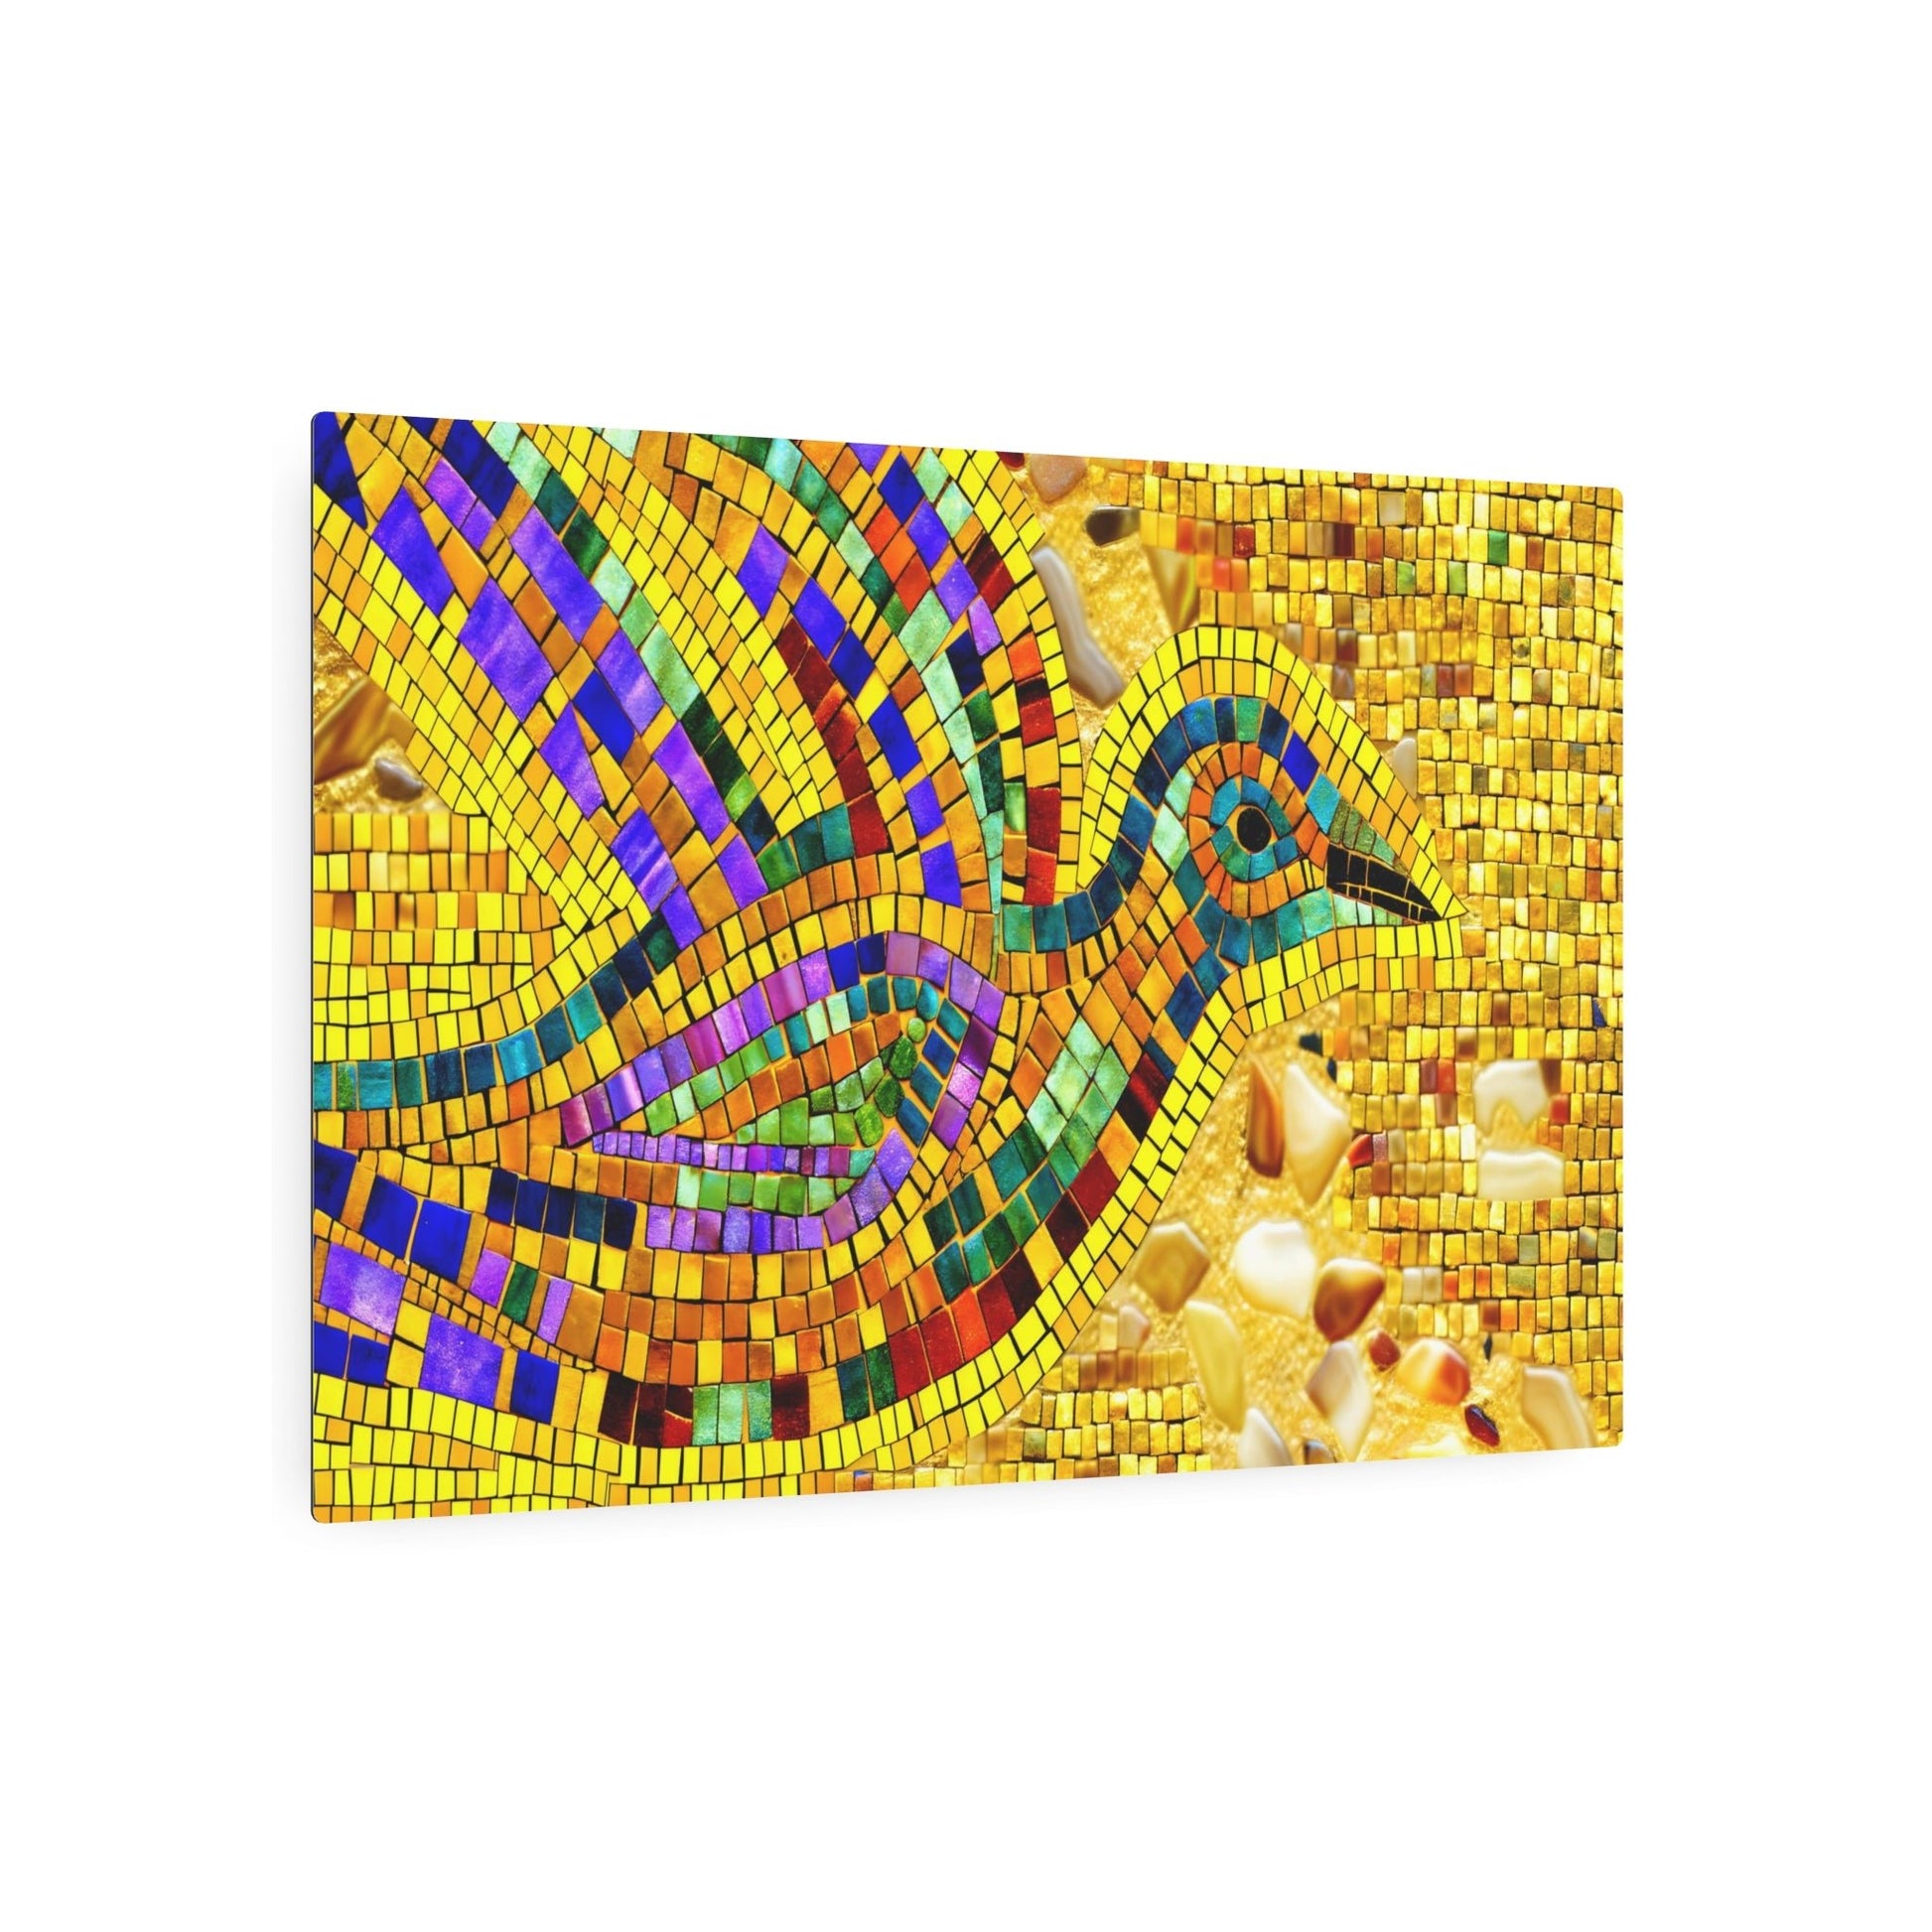 Metal Poster Art | "Byzantine Style Artwork: Vibrant Mosaic Bird Design with Shimmering Gold Tiles - Non-Western & Global Styles Collection" - Metal Poster Art 36″ x 24″ (Horizontal) 0.12''